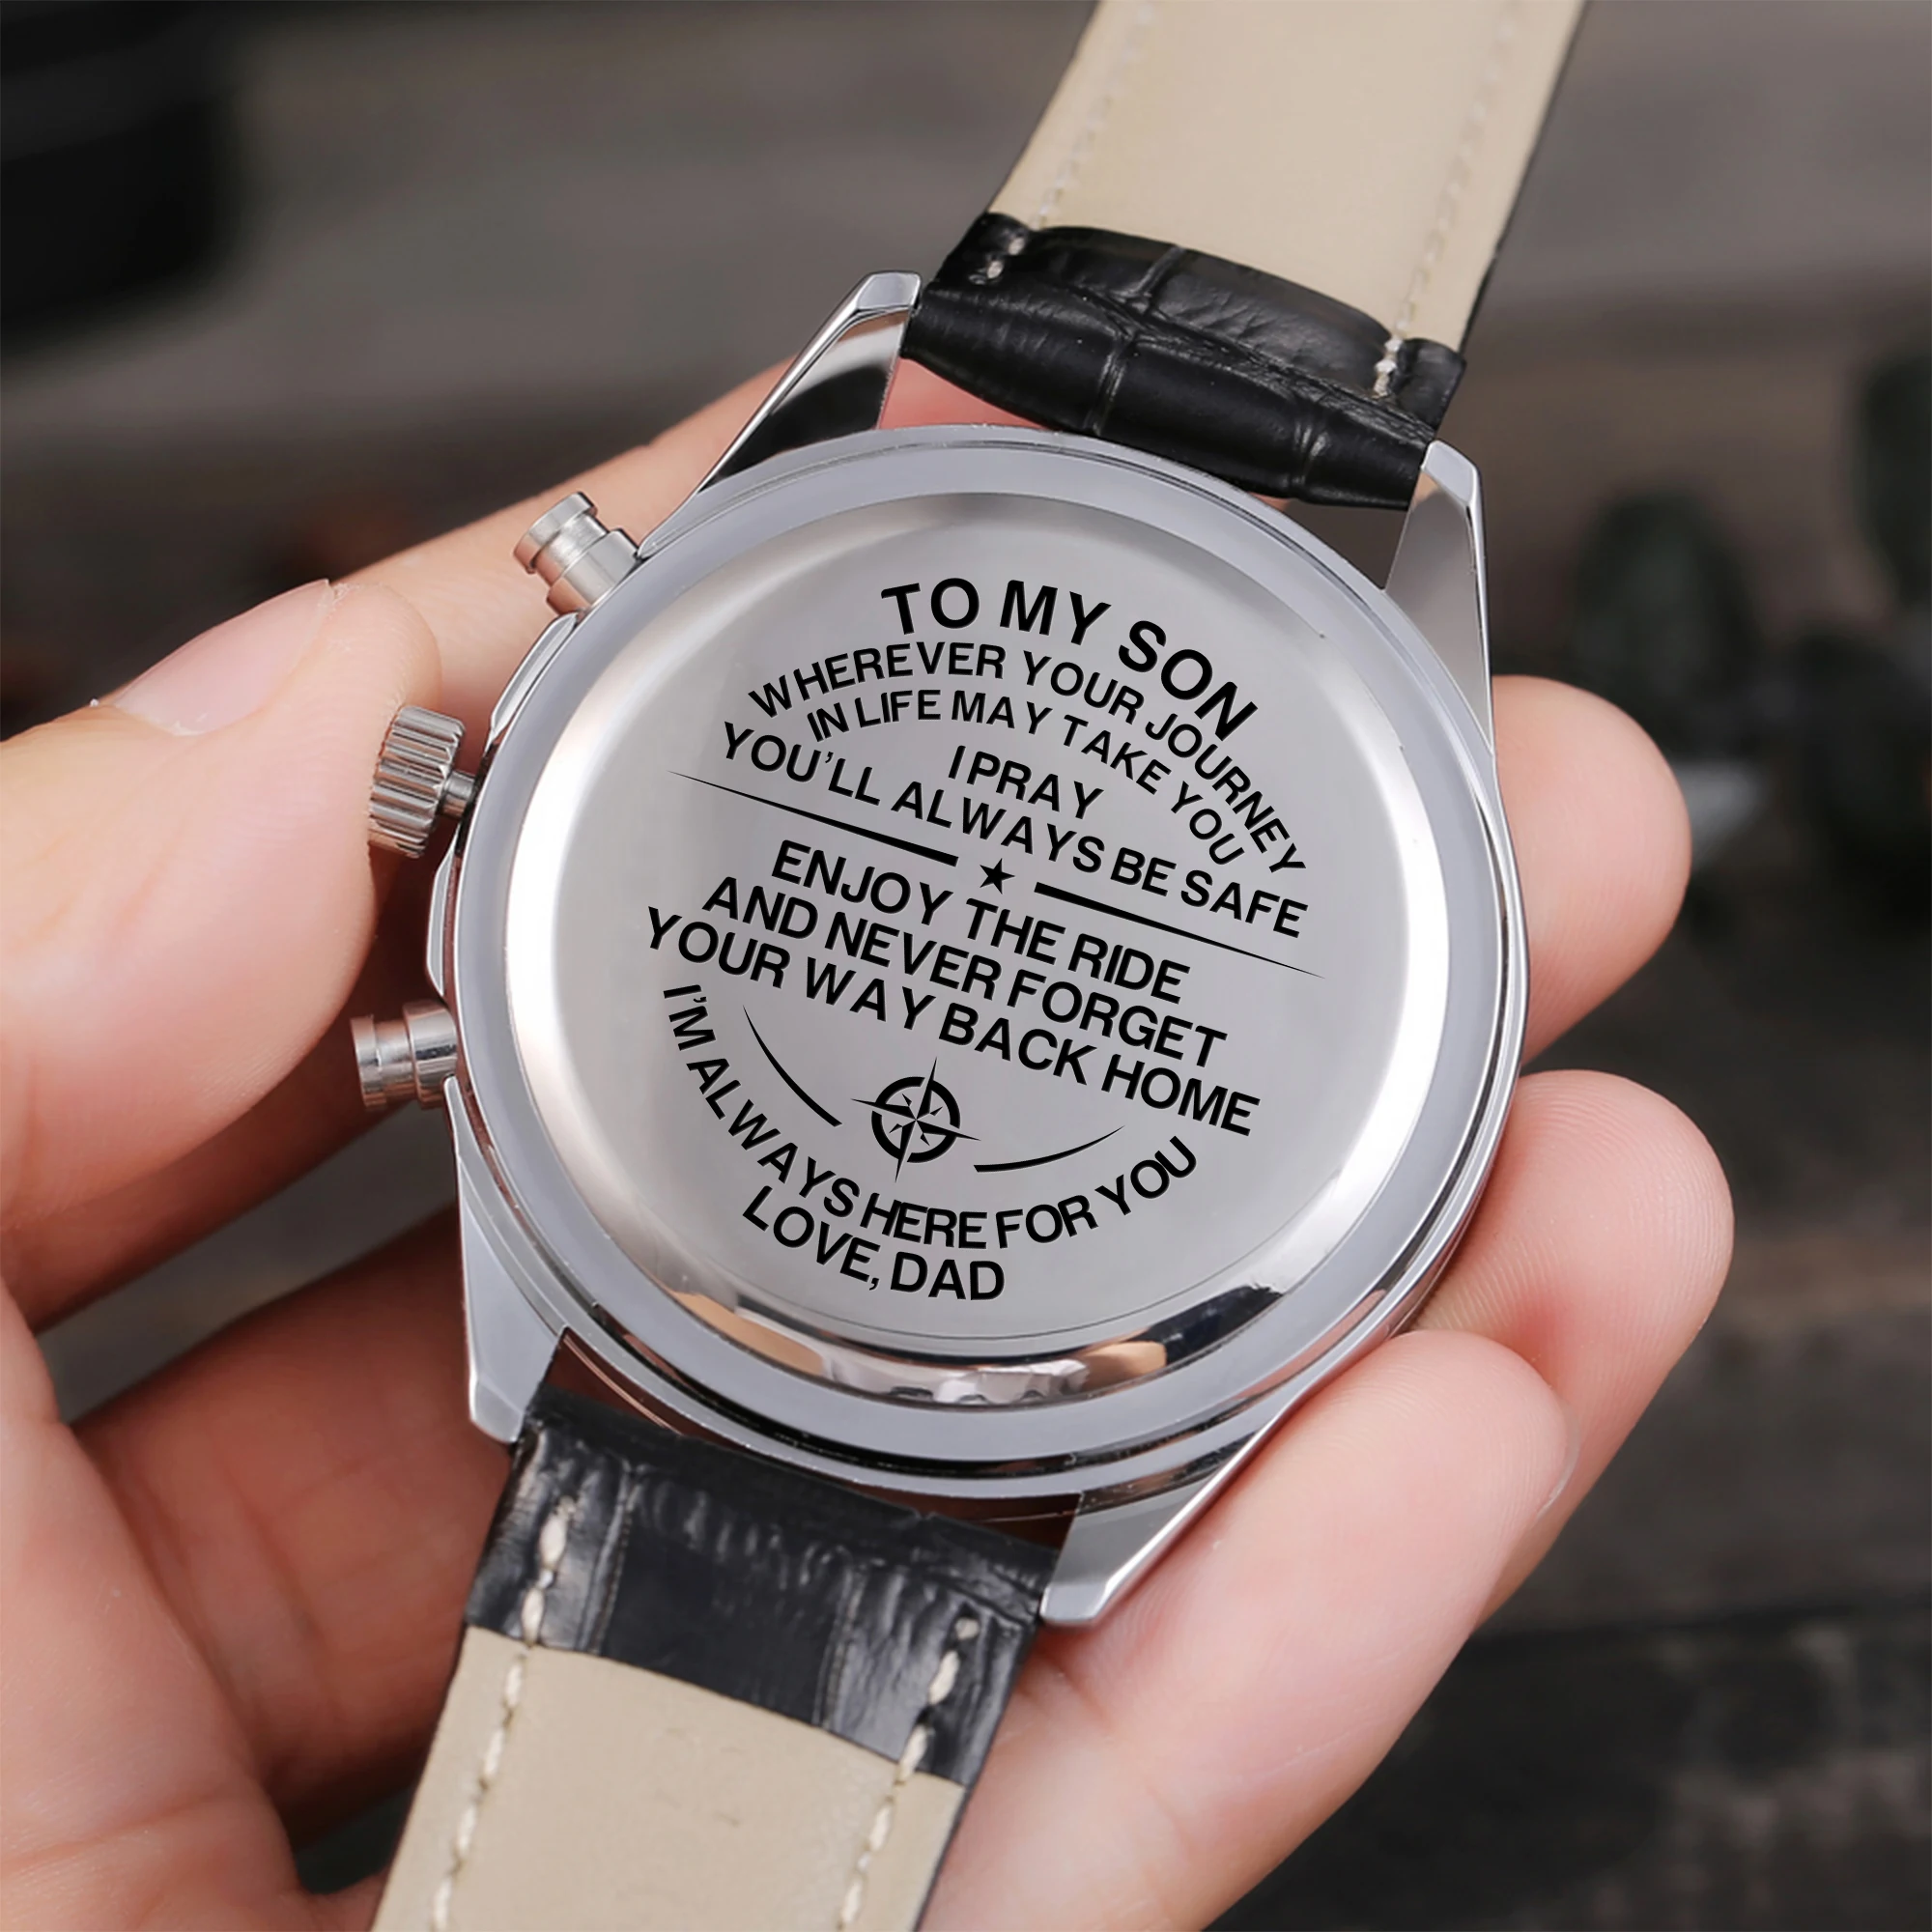 

"Dad To my son I LOVE YOU NOW AND FOREVER ENGRAVED WATCH FROM Male Wrist Watches Calendar 24-hours Dail Analog "